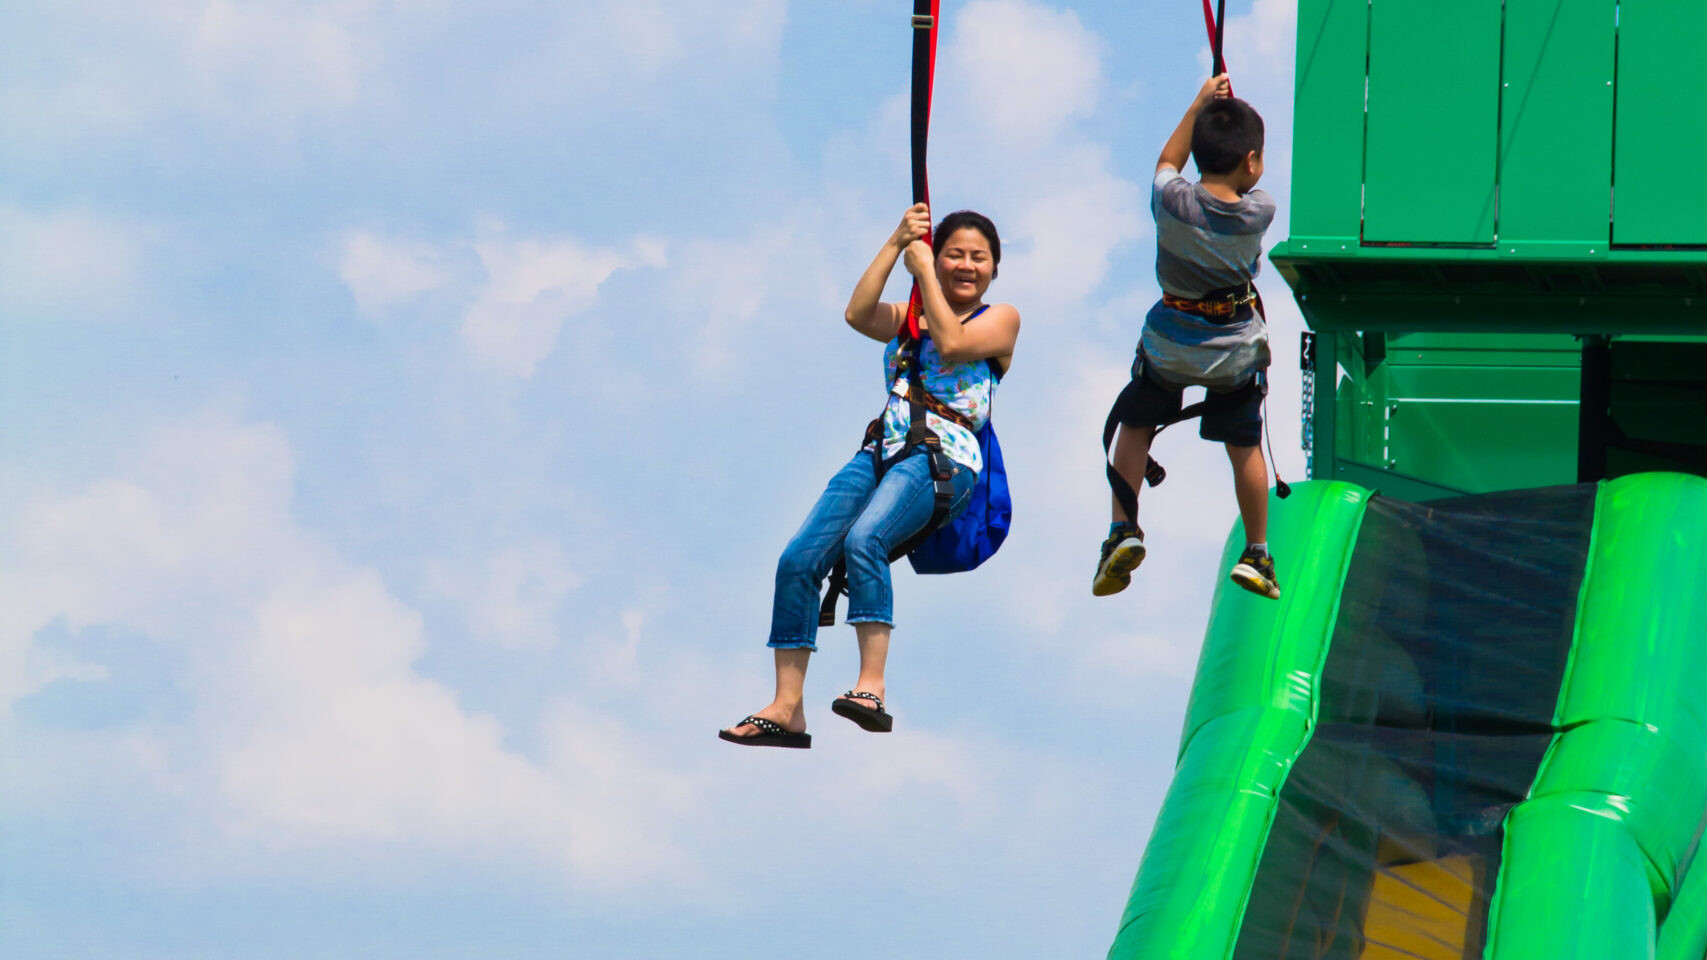 A mom and kid having fun riding down a mobile zip line with slide rental.